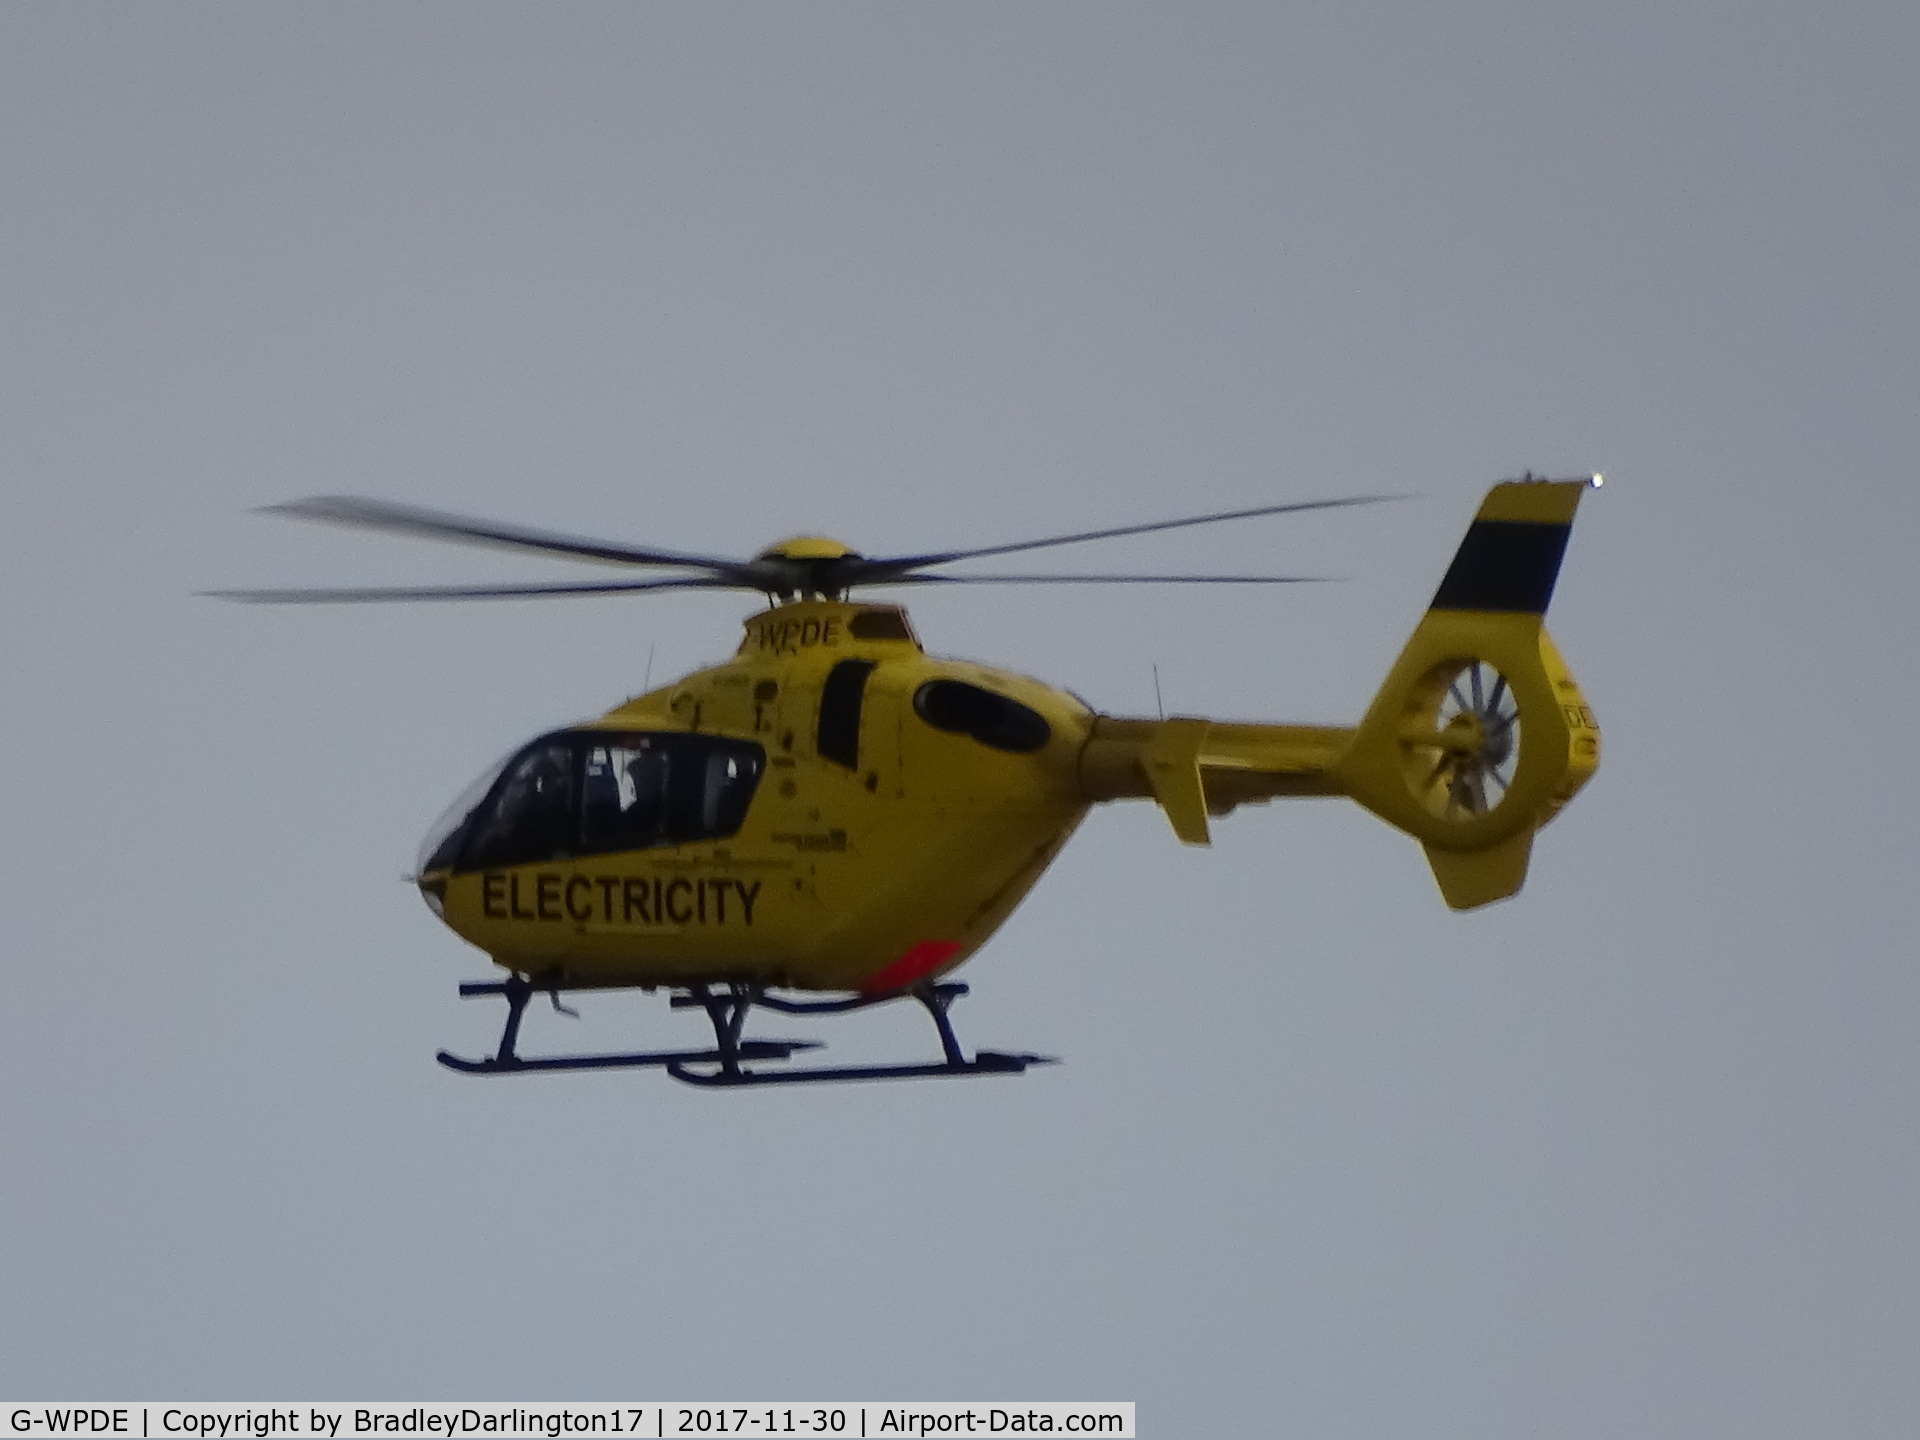 G-WPDE, 2015 Airbus Helicopters EC-135P-2+ C/N 1145, Very Low Flying Over A Plymouth Shopping Area